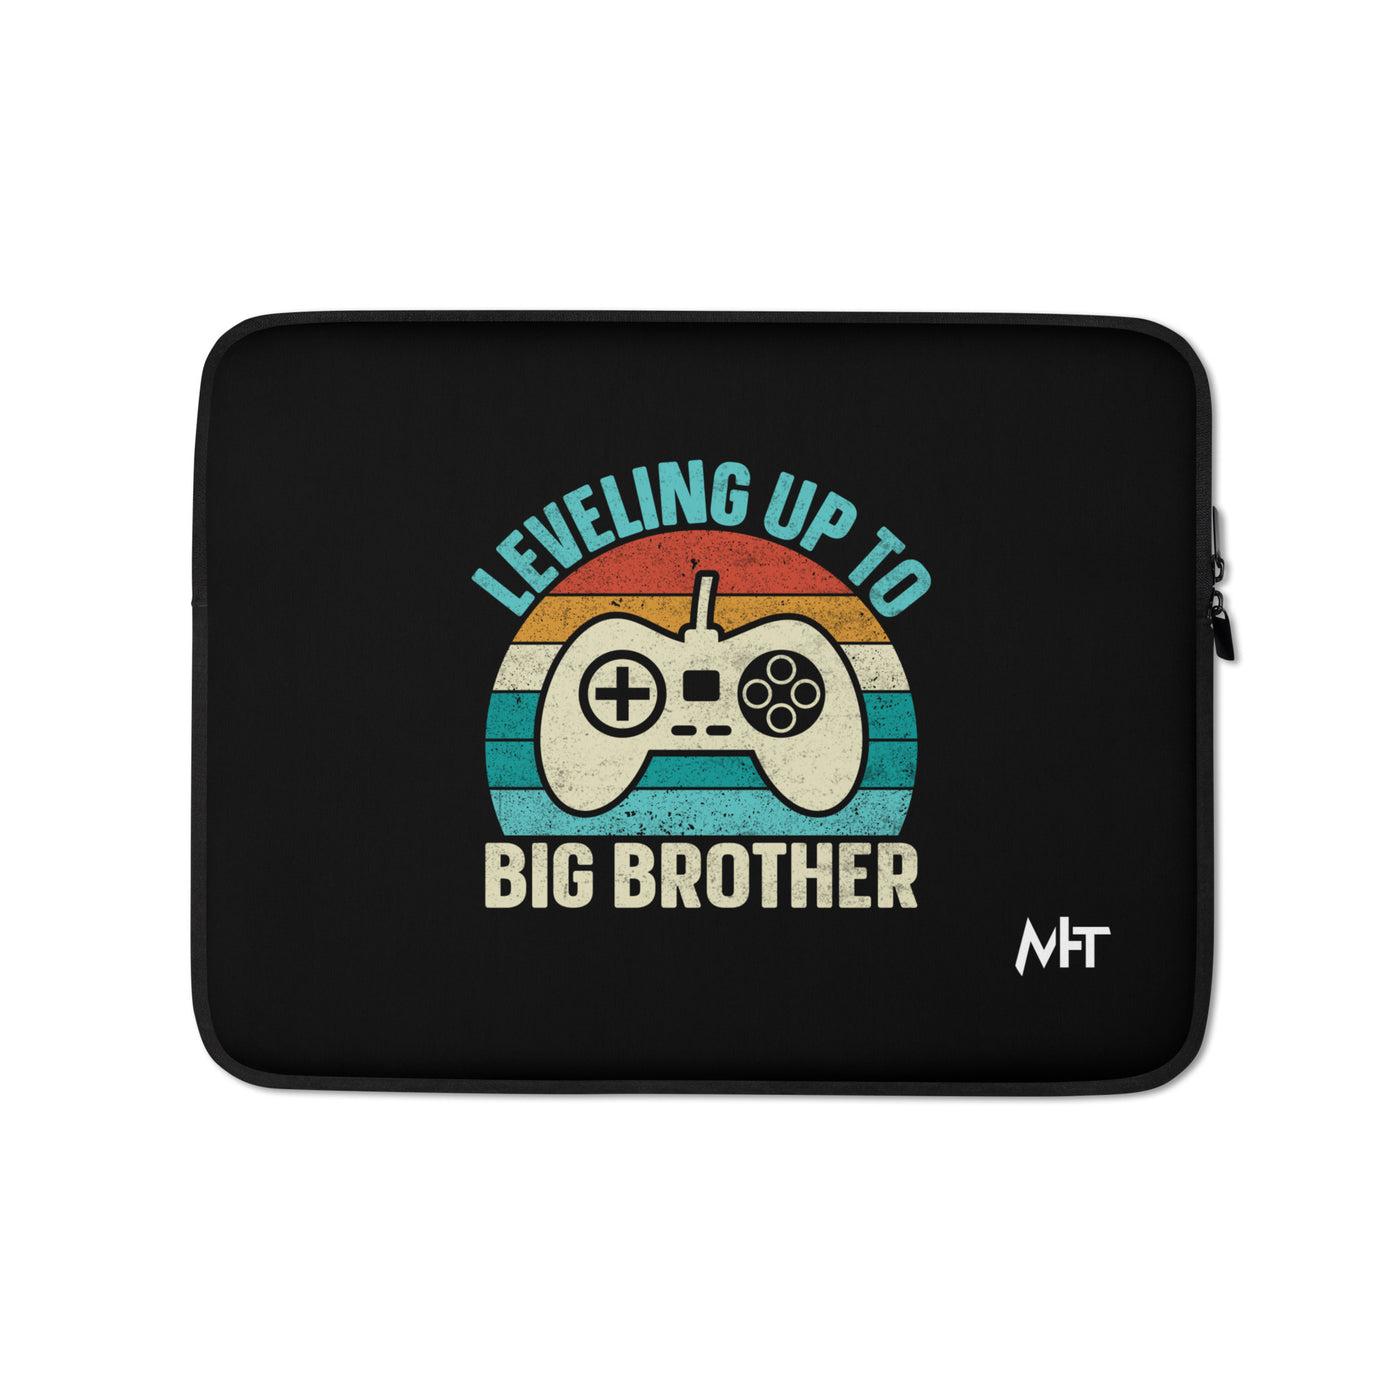 Levelling up to Big Brother V2 - Laptop Sleeve